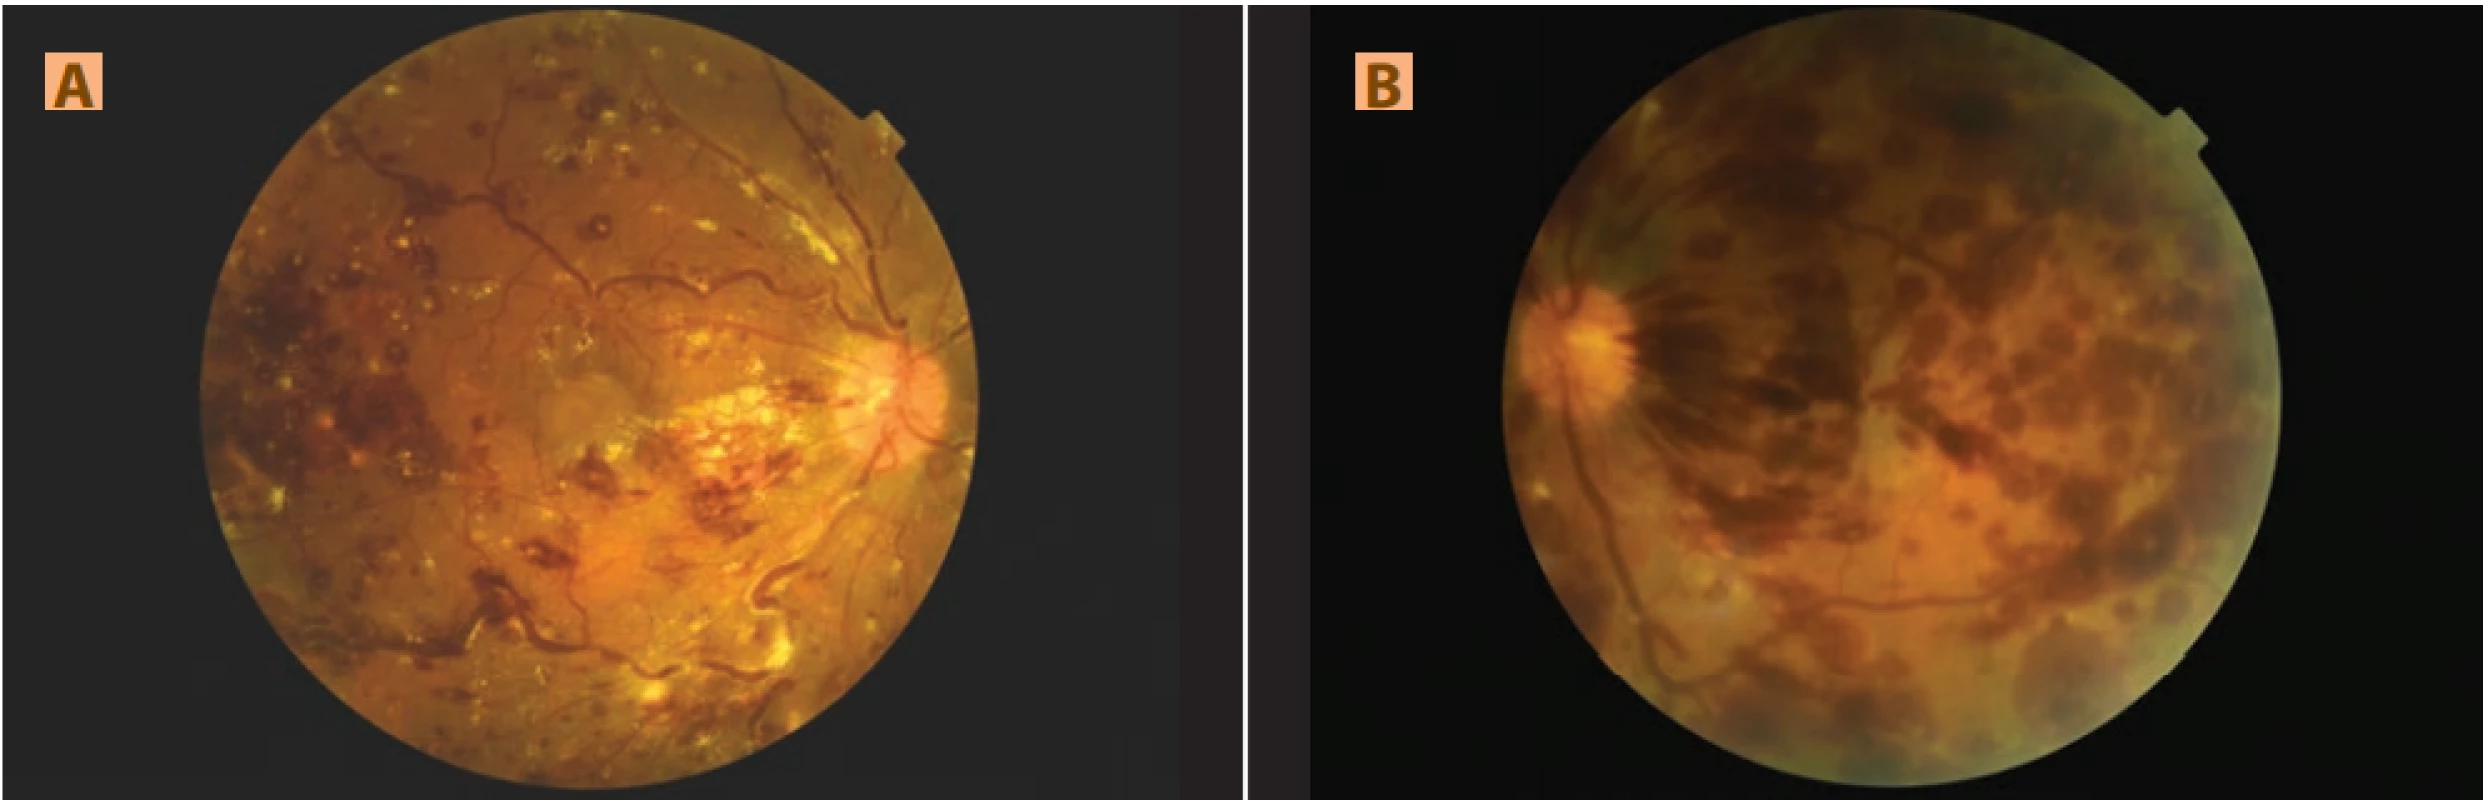 Finding on fundus of right (A) and left (B) eye: fundus with blot, flame-shaped haemorrhages and Roth’s spots, from central periphery image of clusters of hard exudates, veins markedly dilated and tortuous with visible whitish deposits in blood, (B) more extensive haemorrhages and less hard exudates 